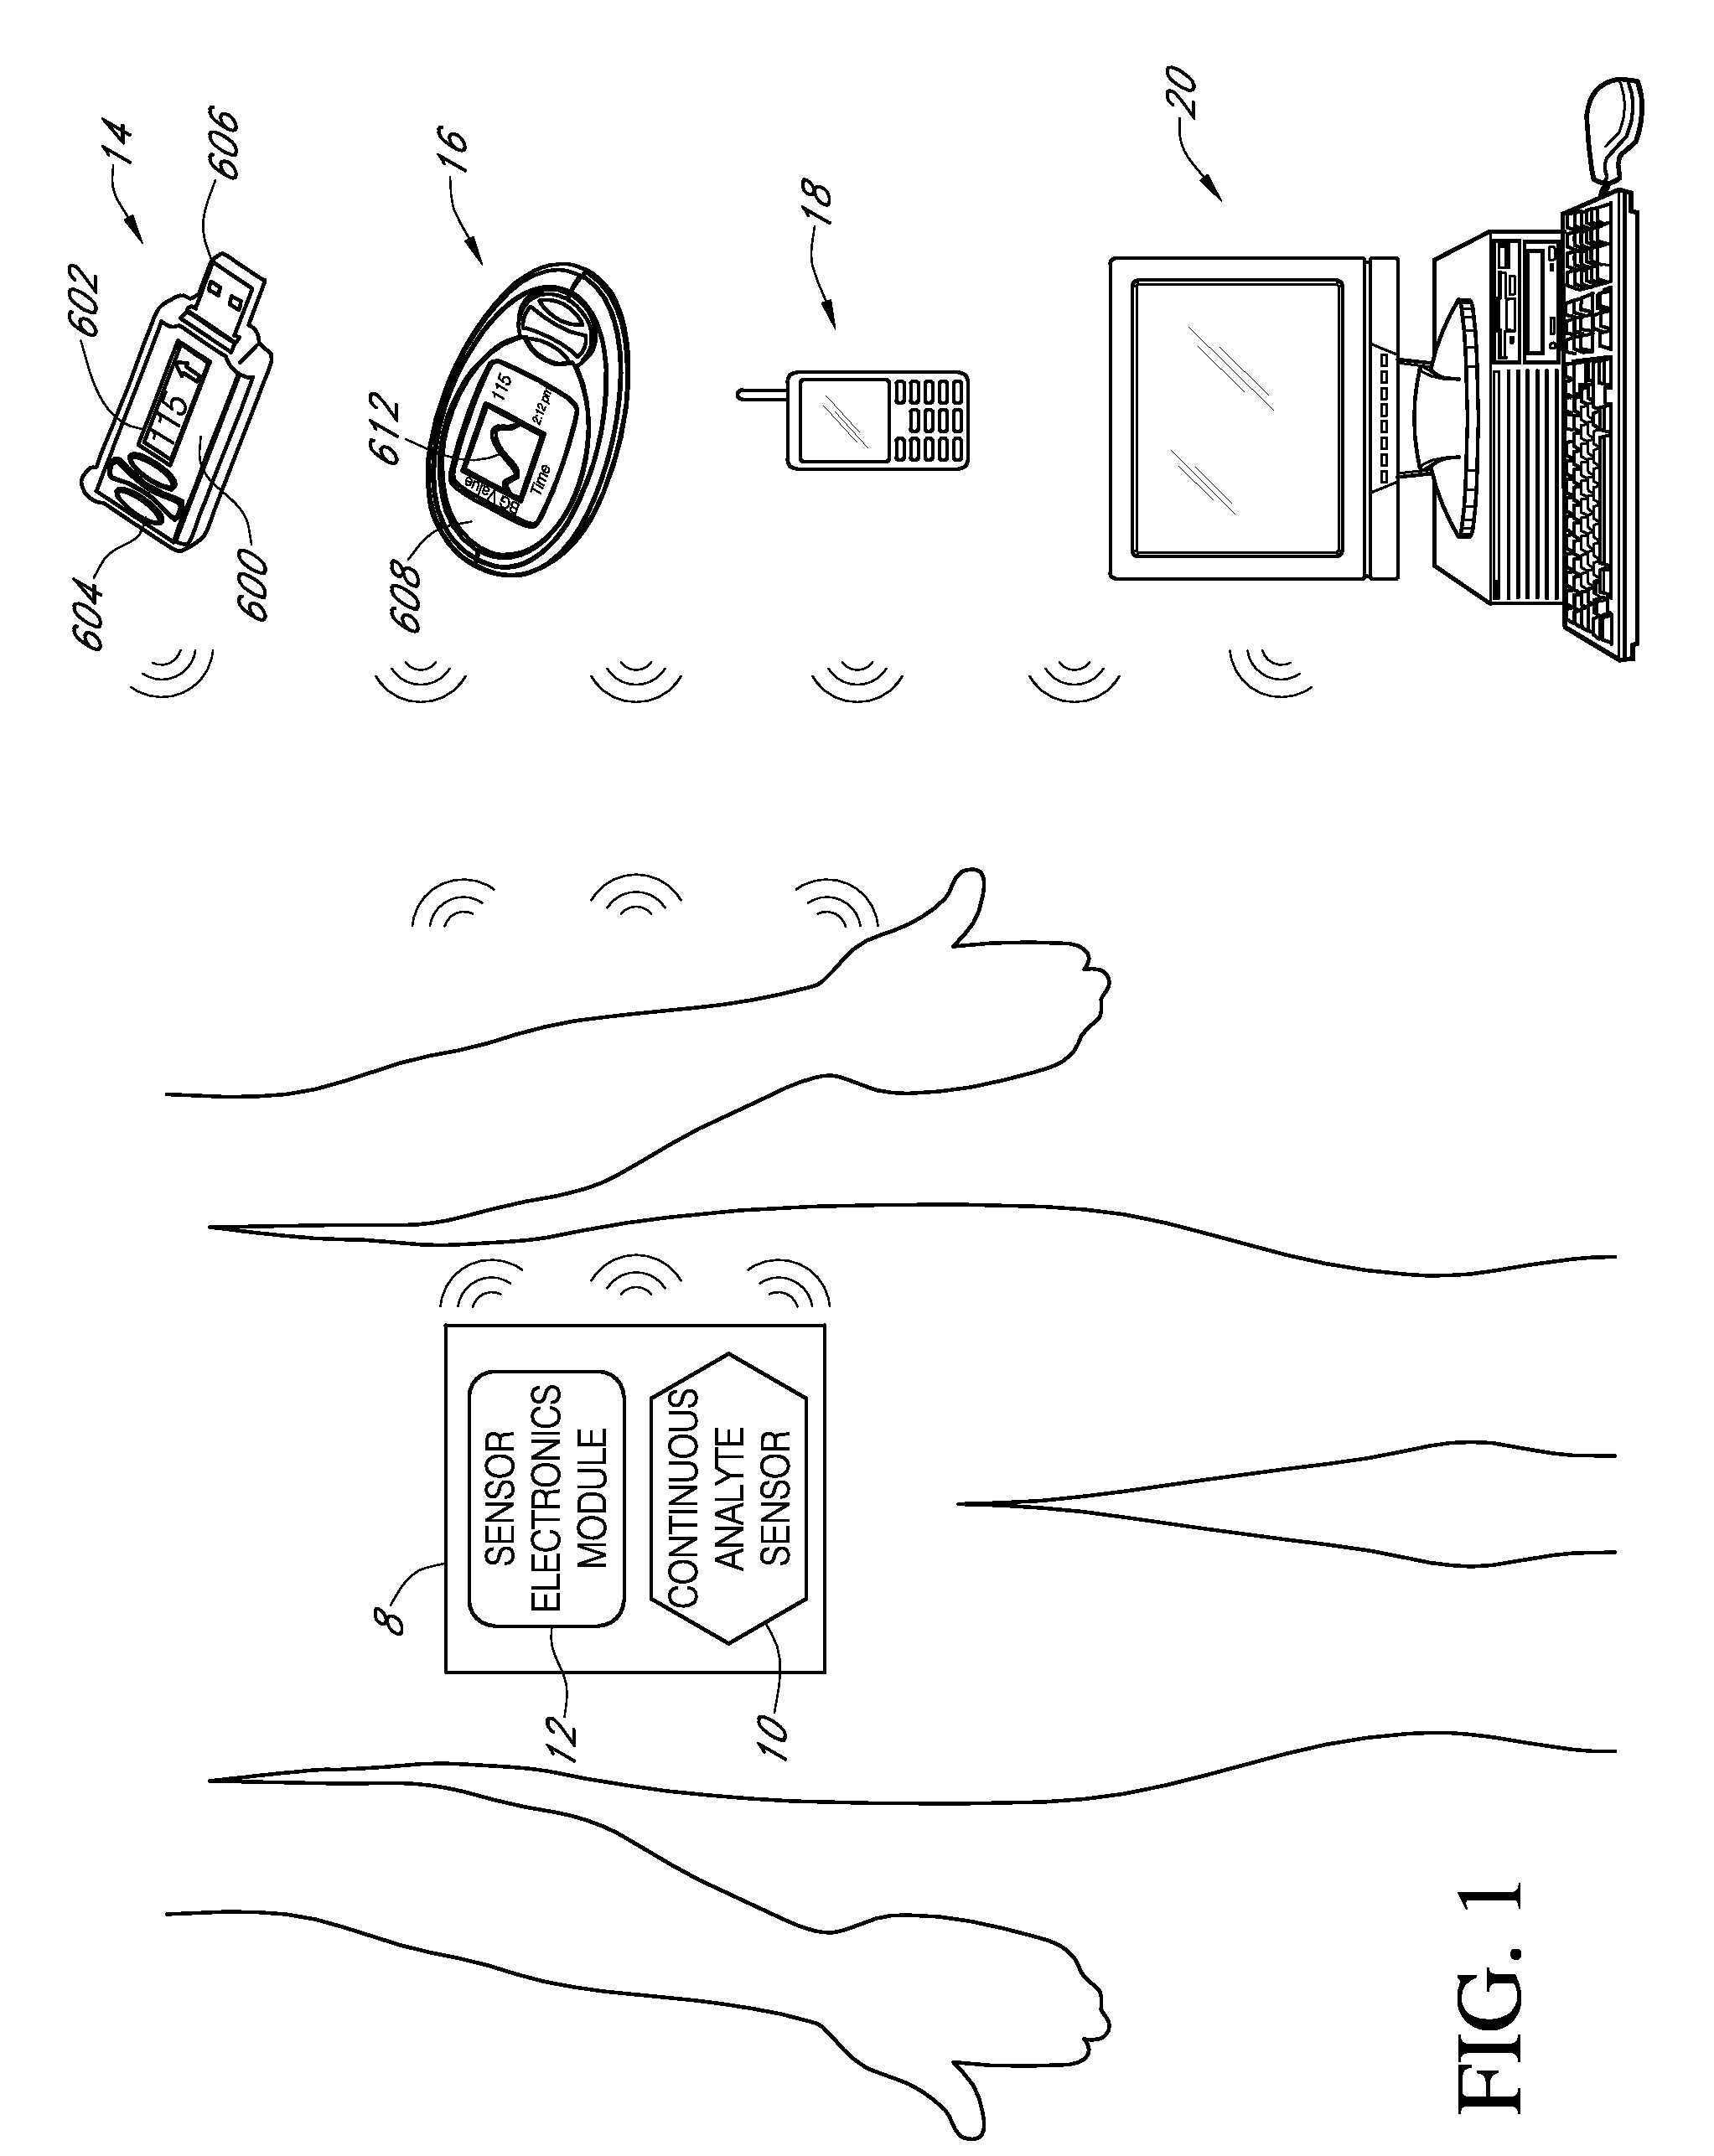 Systems and methods for customizing delivery of sensor data